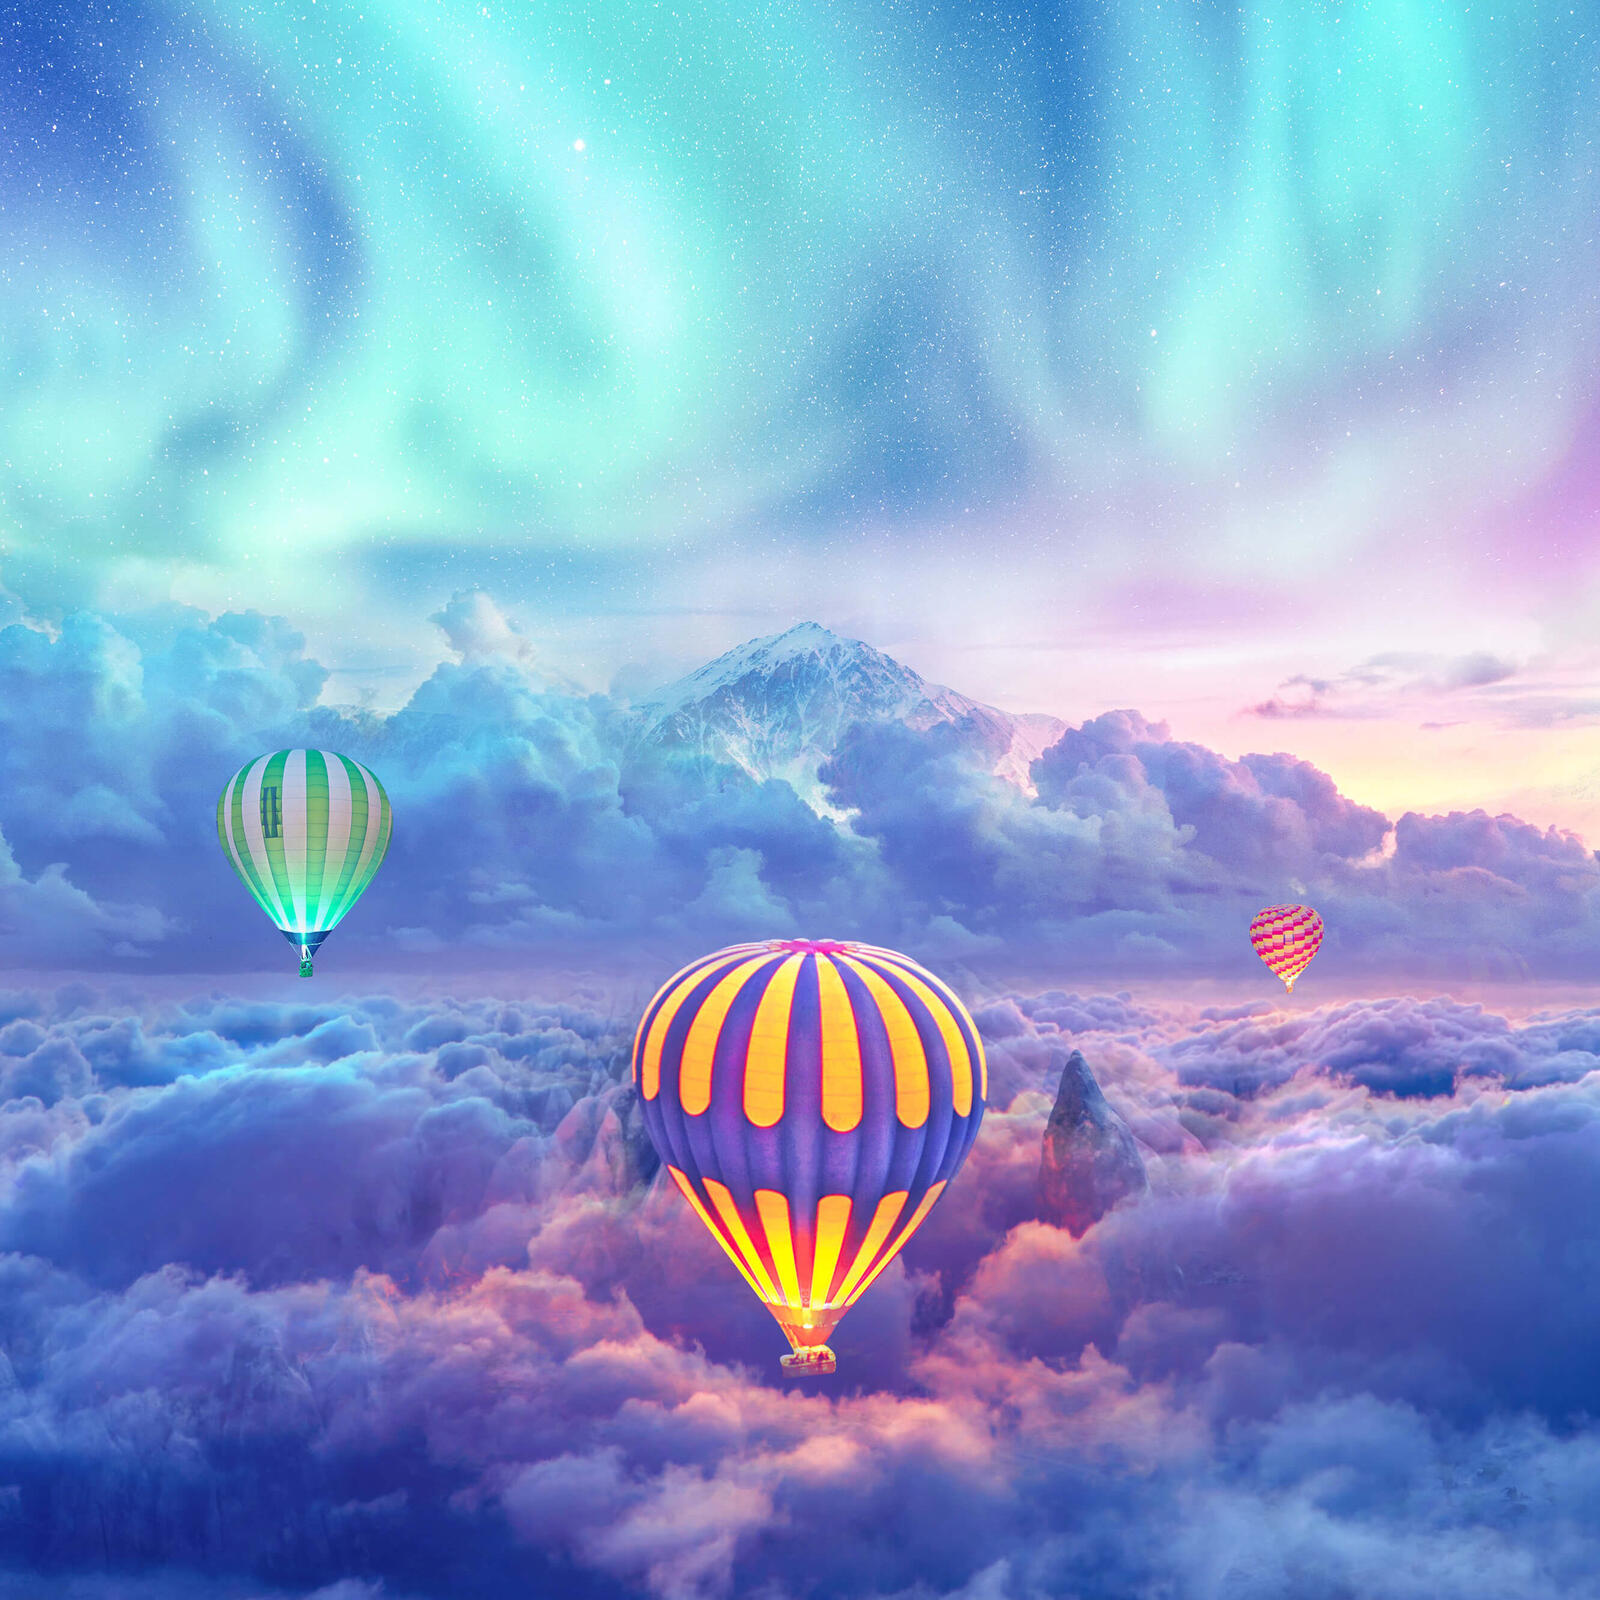 Wallpapers fly clouds colorful on the desktop